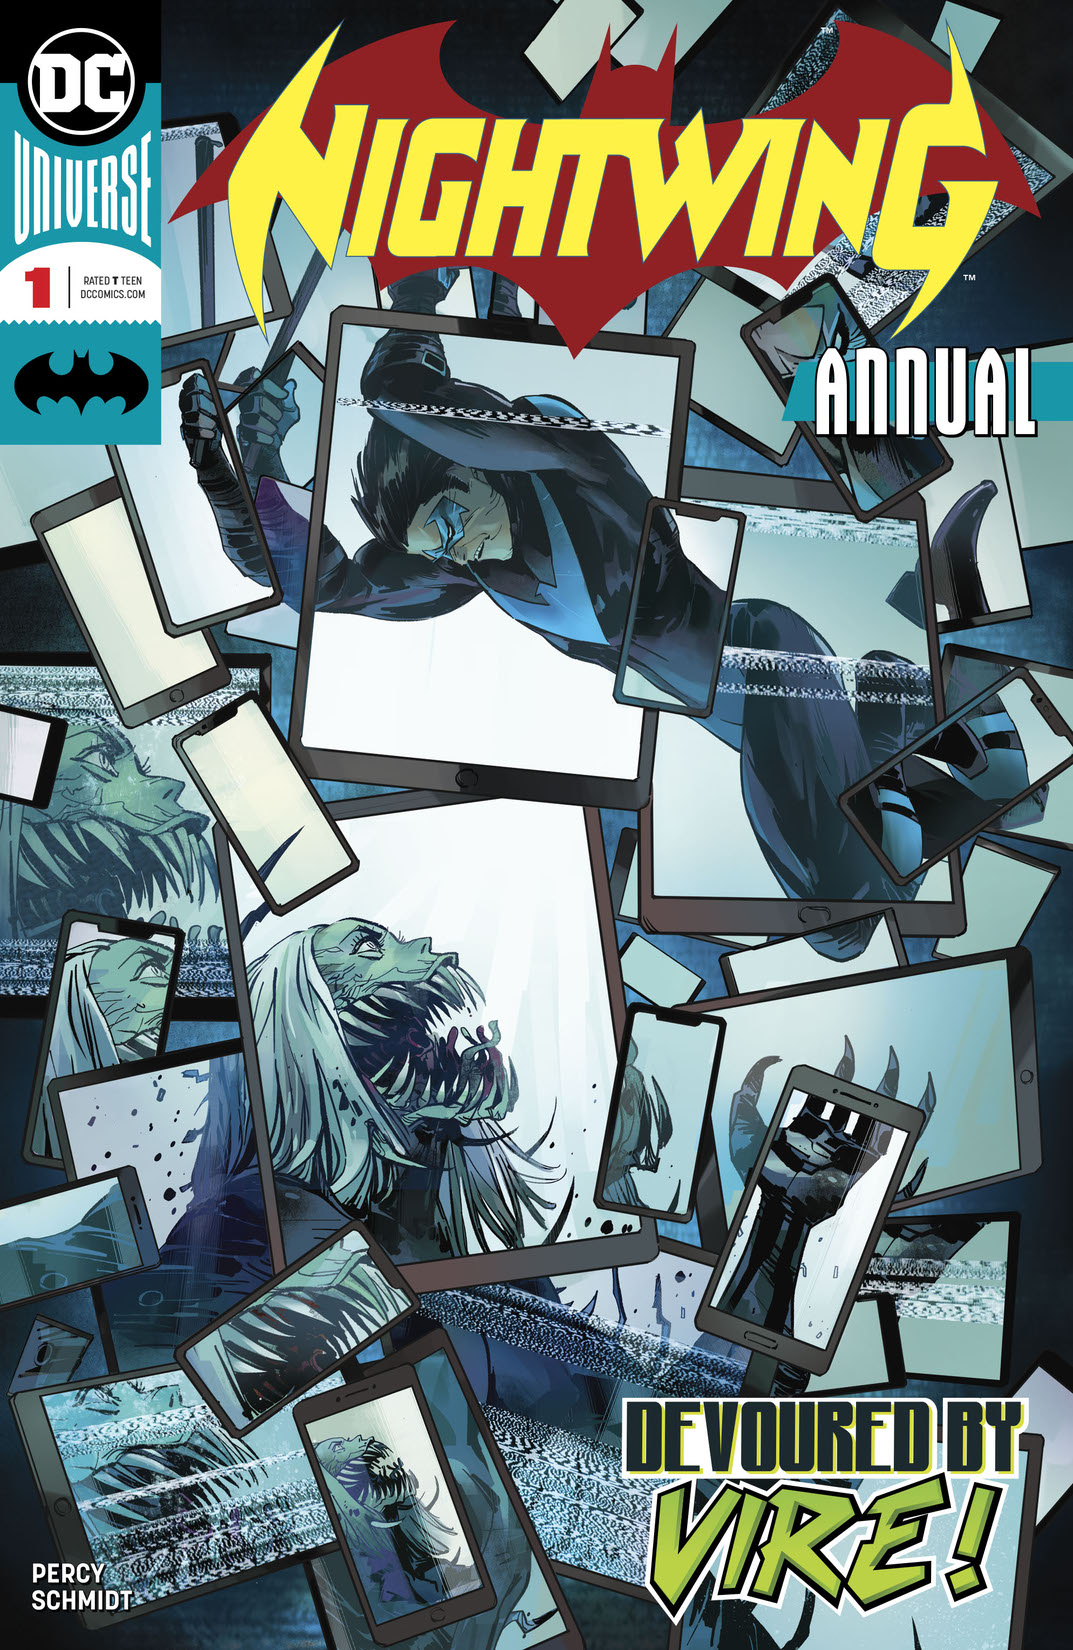 Nightwing Annual (2018-) #1 preview images